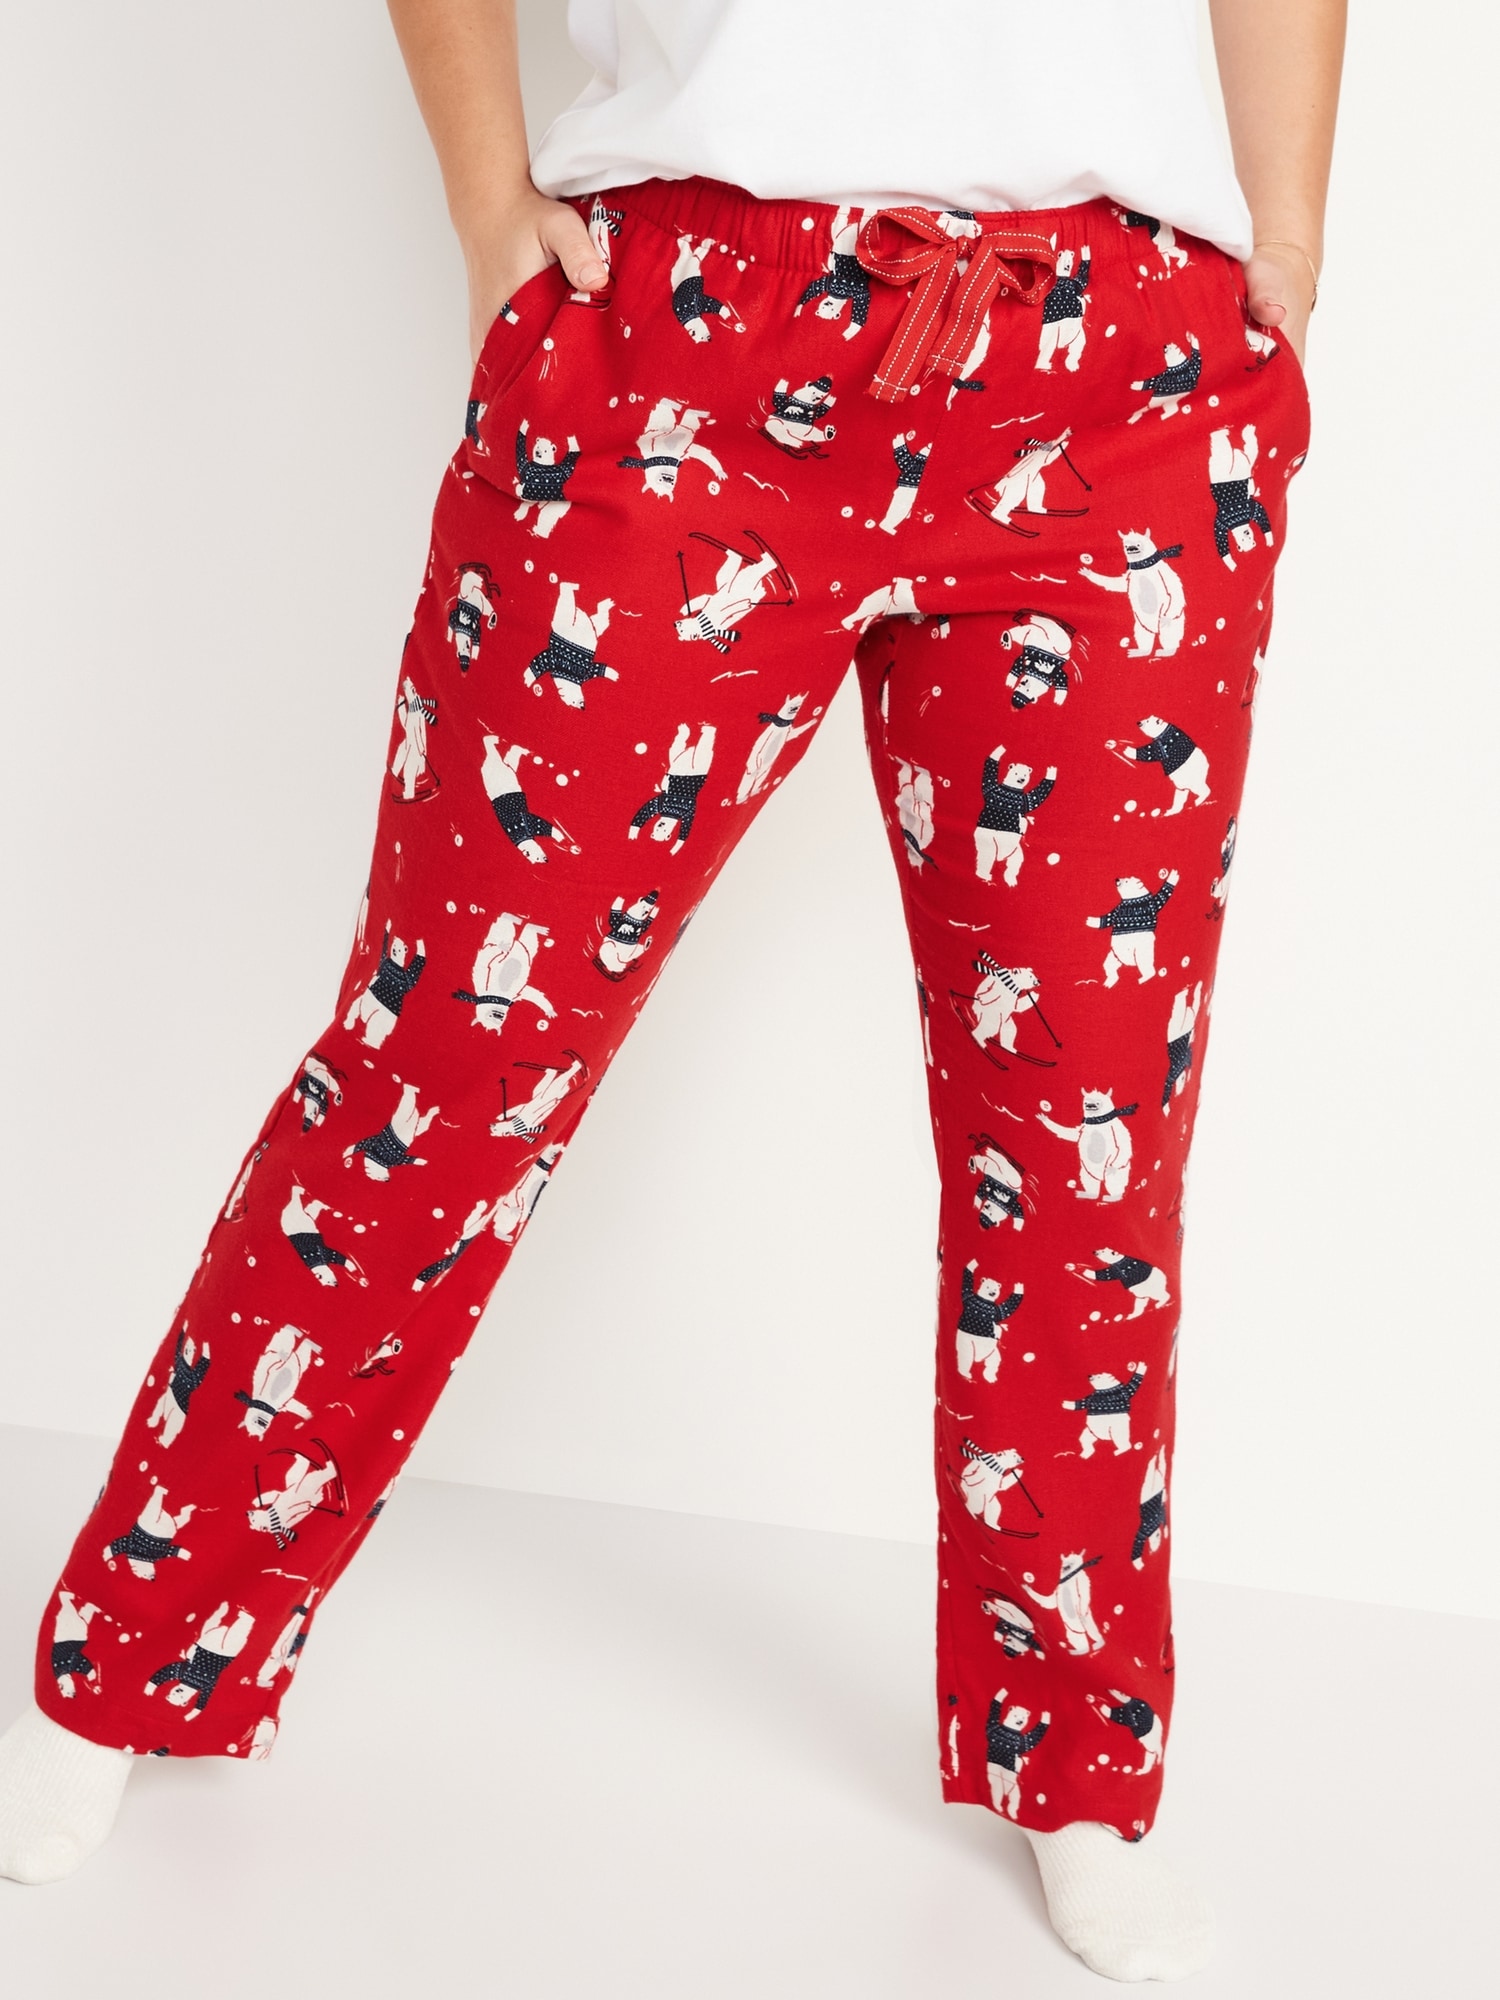 matching-printed-flannel-pajama-pants-for-women-old-navy